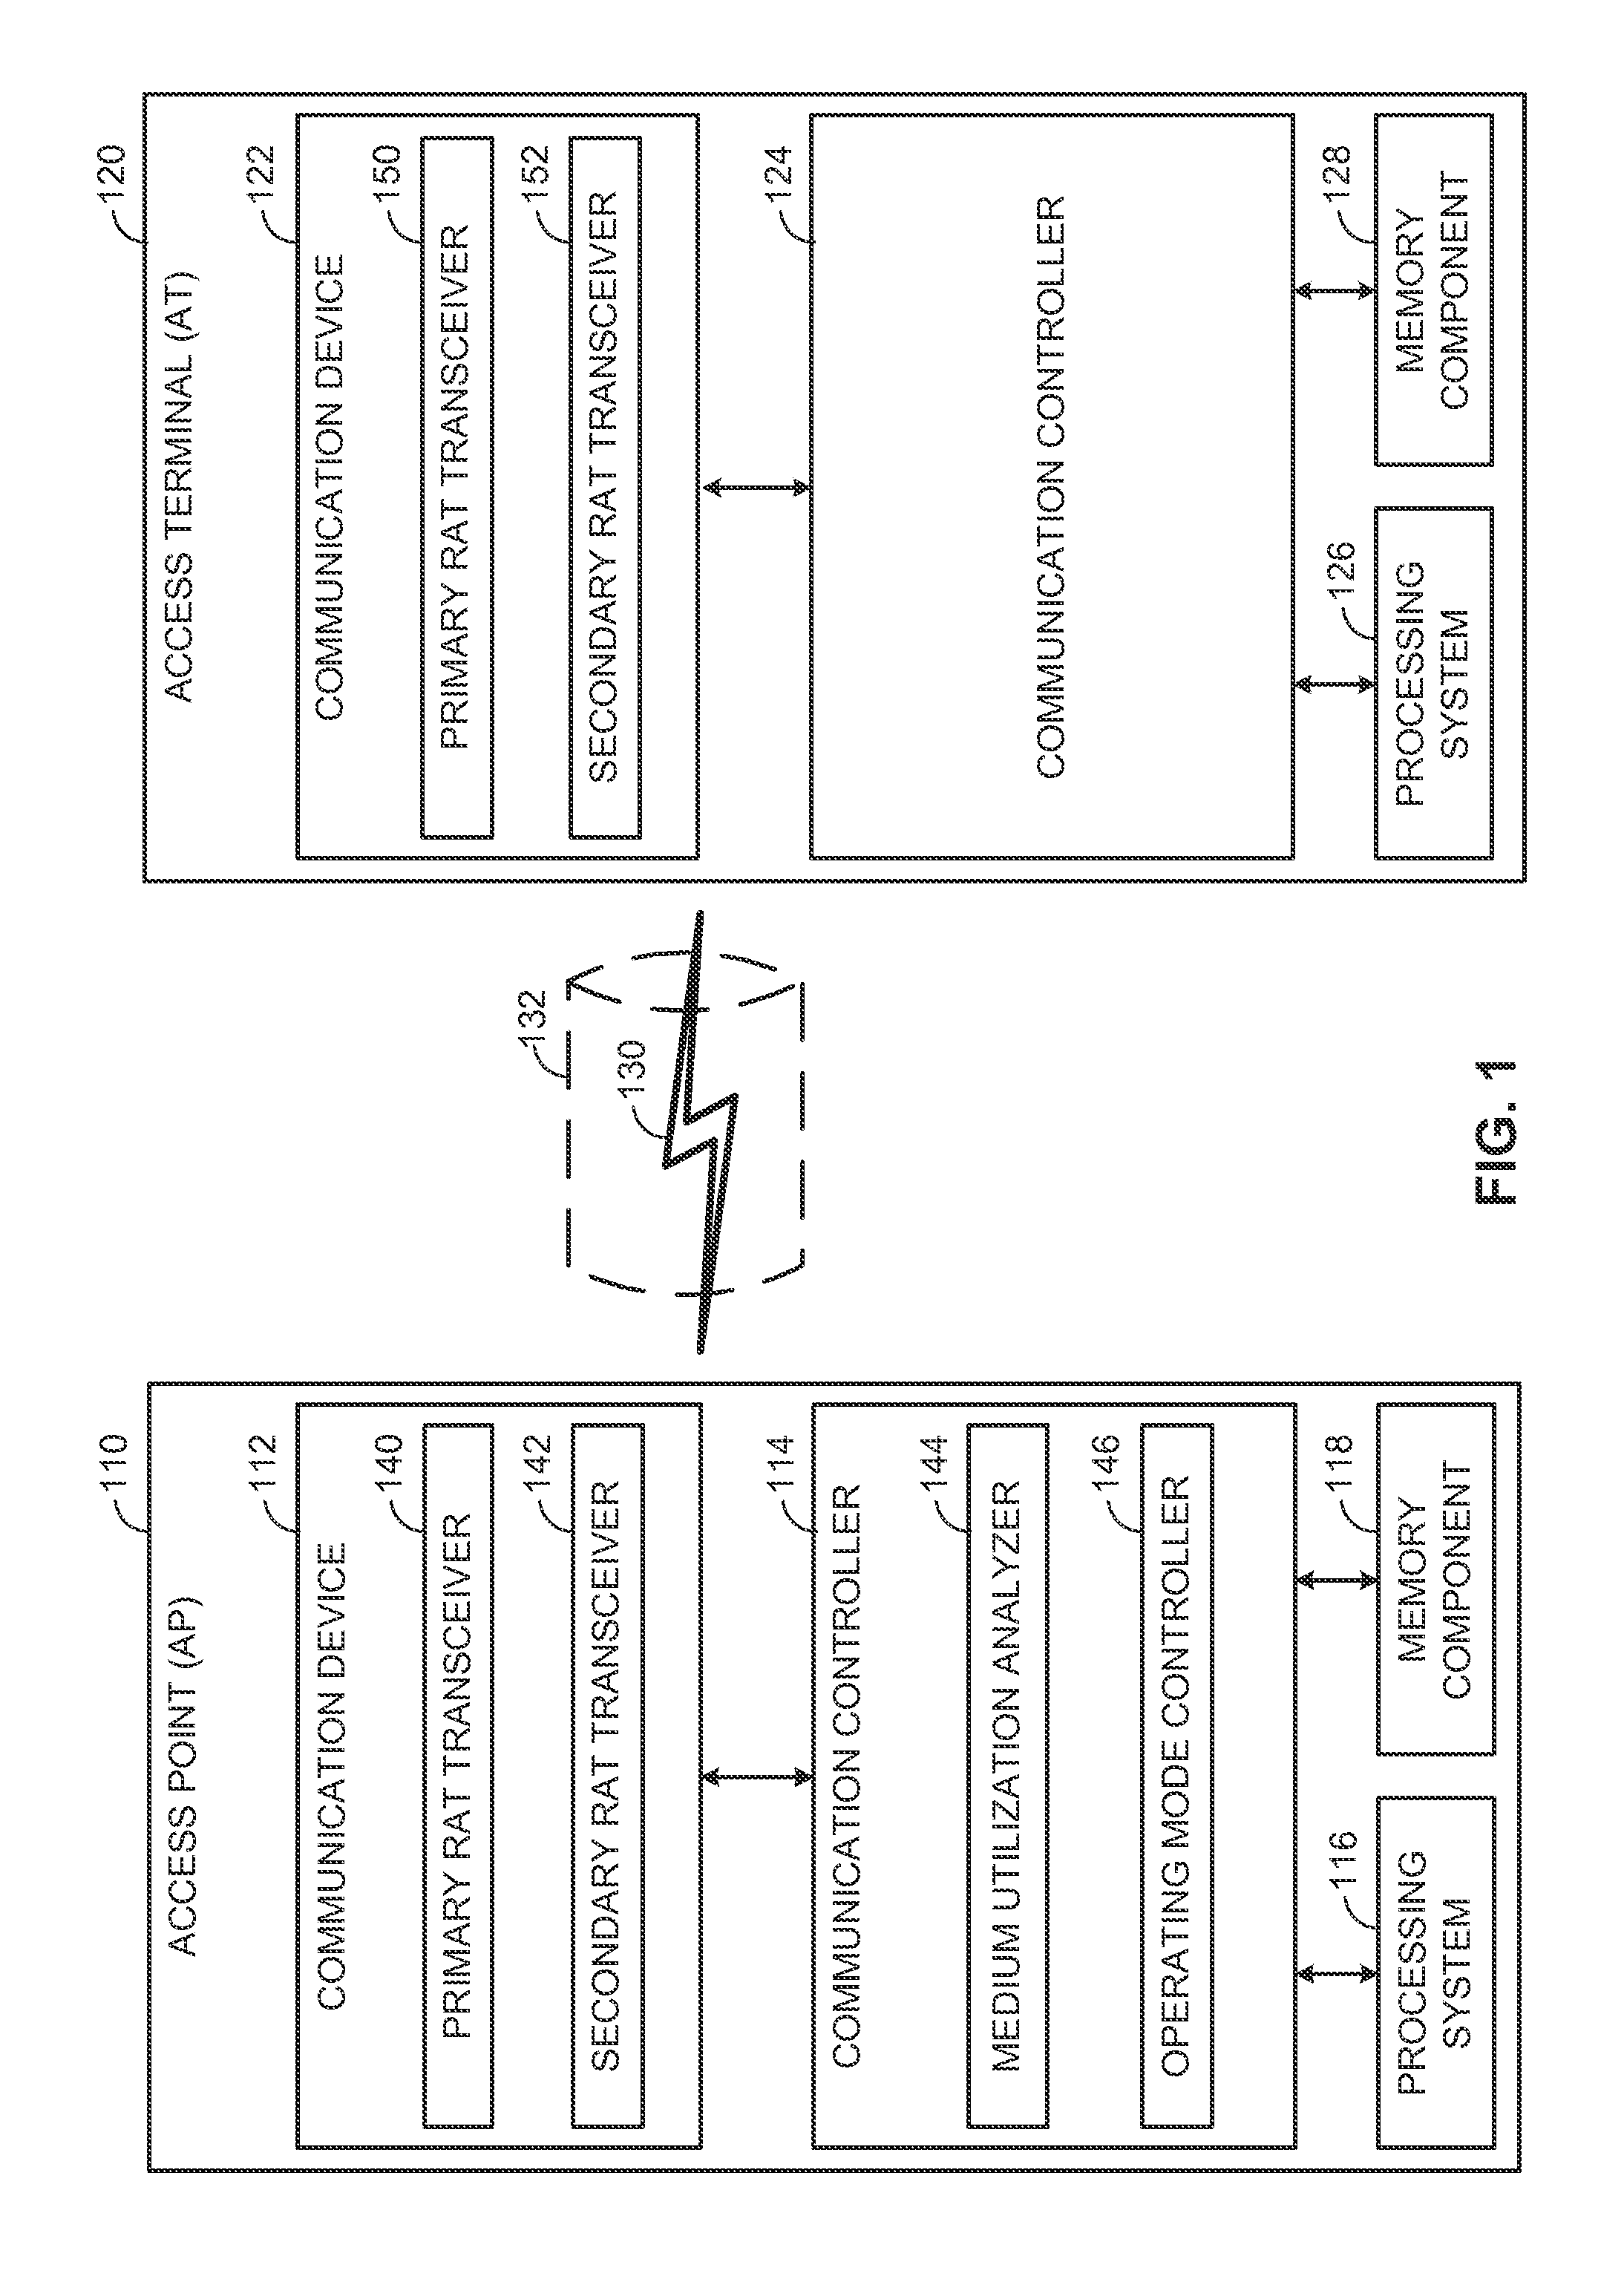 Discontinuous reception (DRX)-aware carrier sense adaptive transmission (CSAT) in shared spectrum